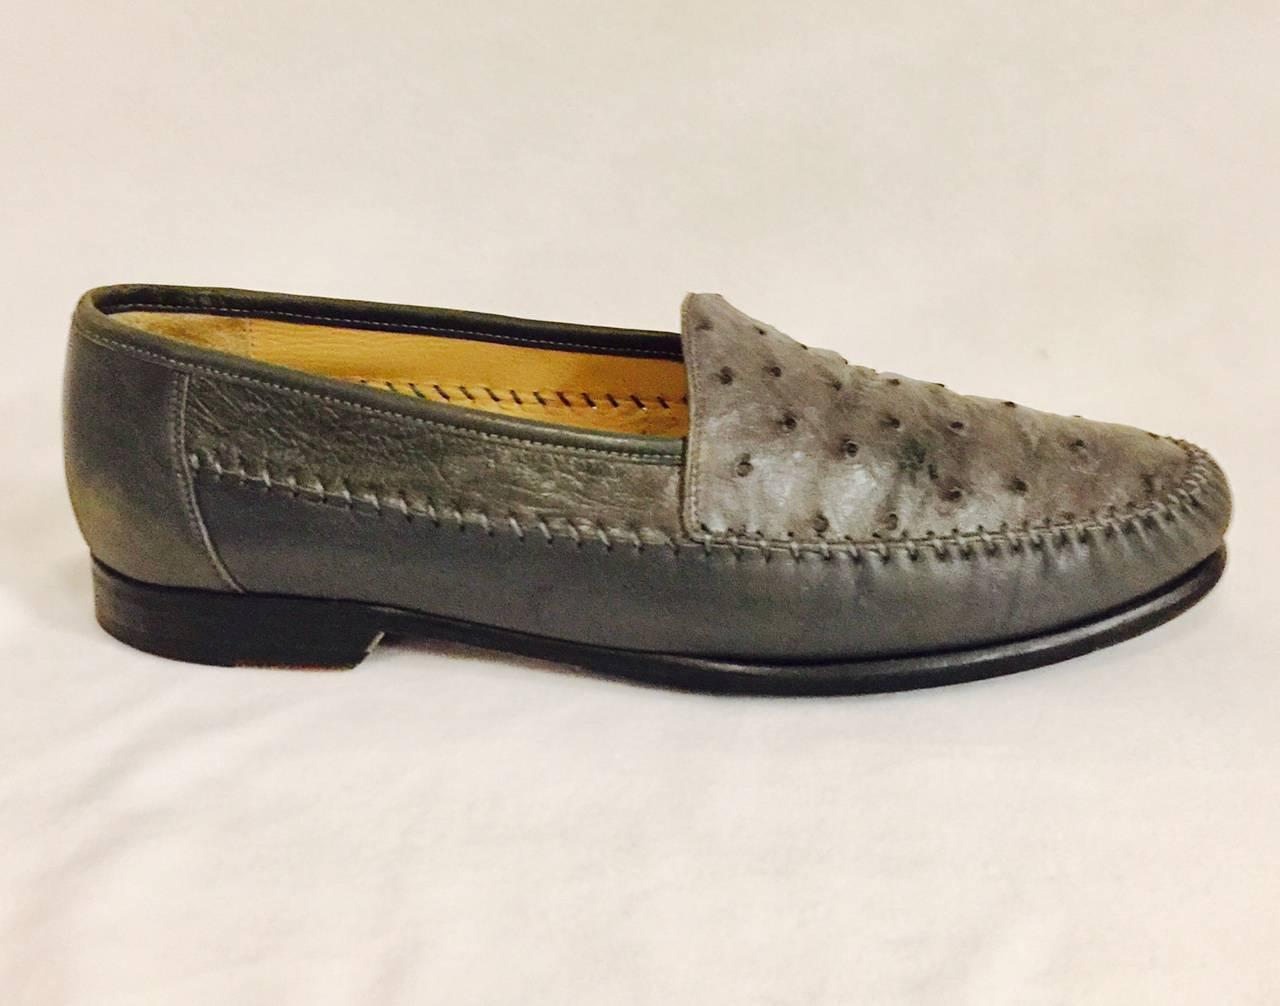 Handsome pair of neutral dove grey  Avventura ostrich loafers, handmade in Spain.  A rubber sole has been added for extra traction, in very good used condition.  Classy and elegant!